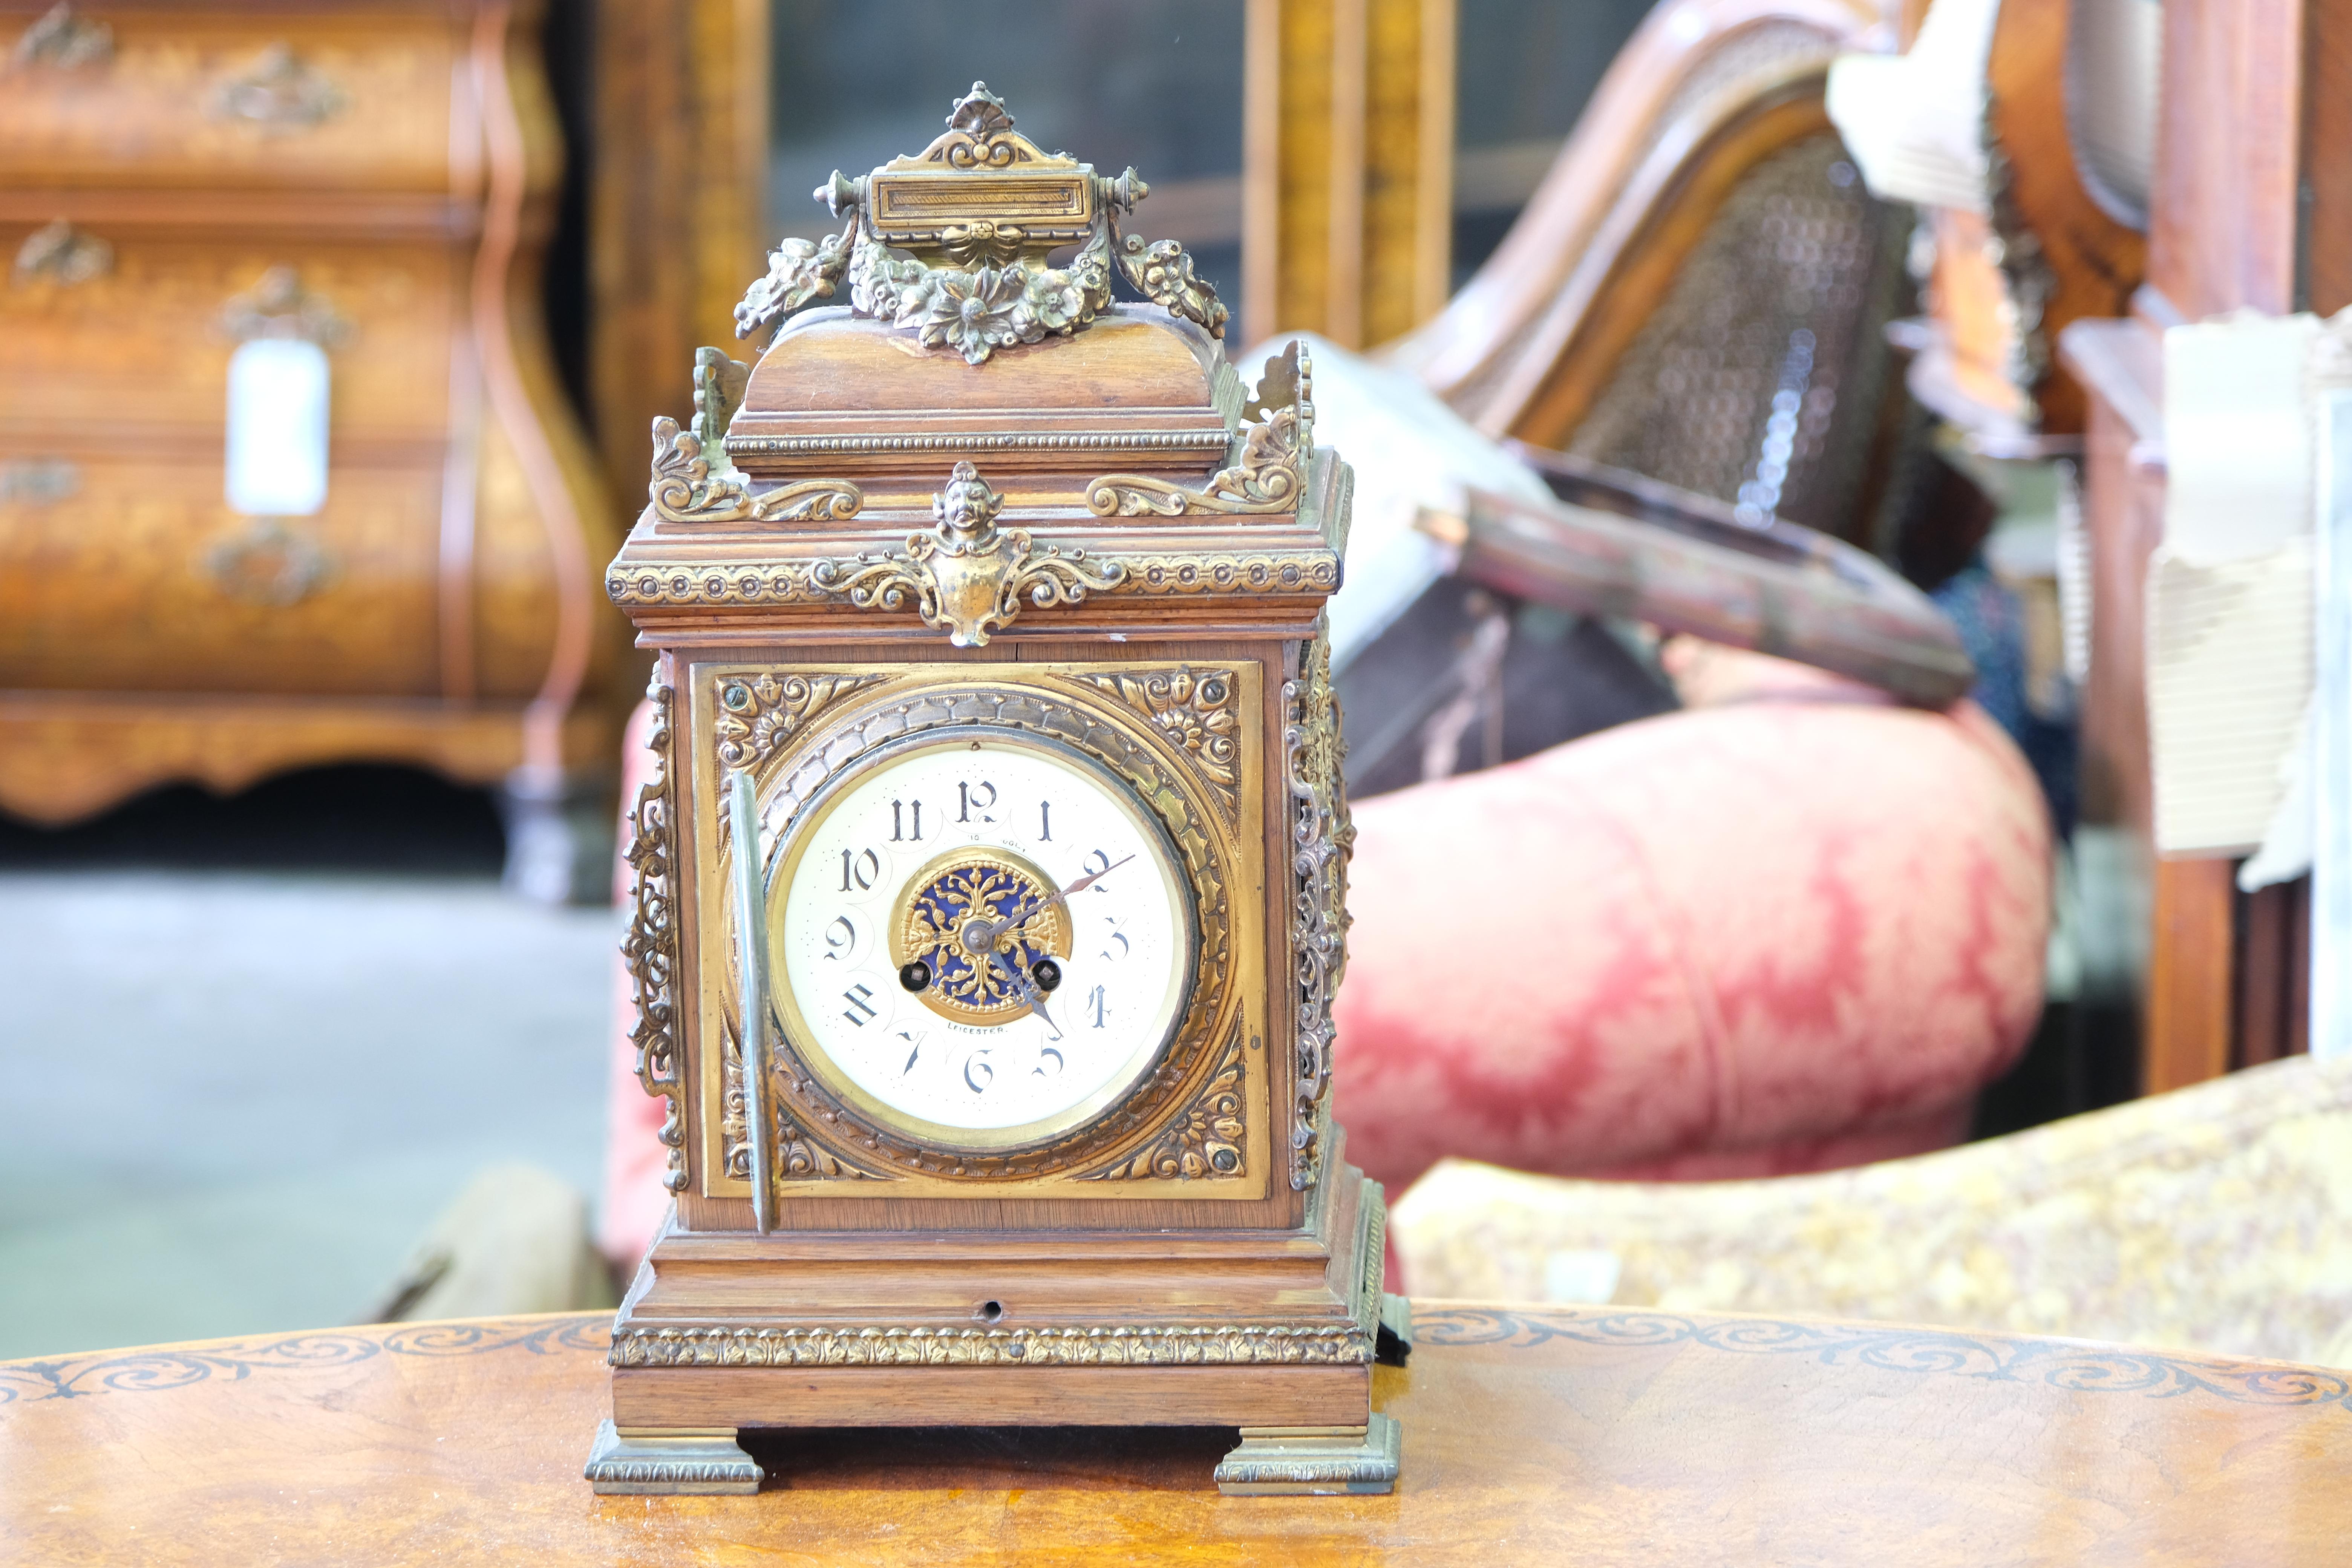 A fine quality 19th century English bracket clock of the Georgian era. The classical styled numerals and gilt topped case are surmounted by a floral sculpture. Marked on the face 'Leicester'. 